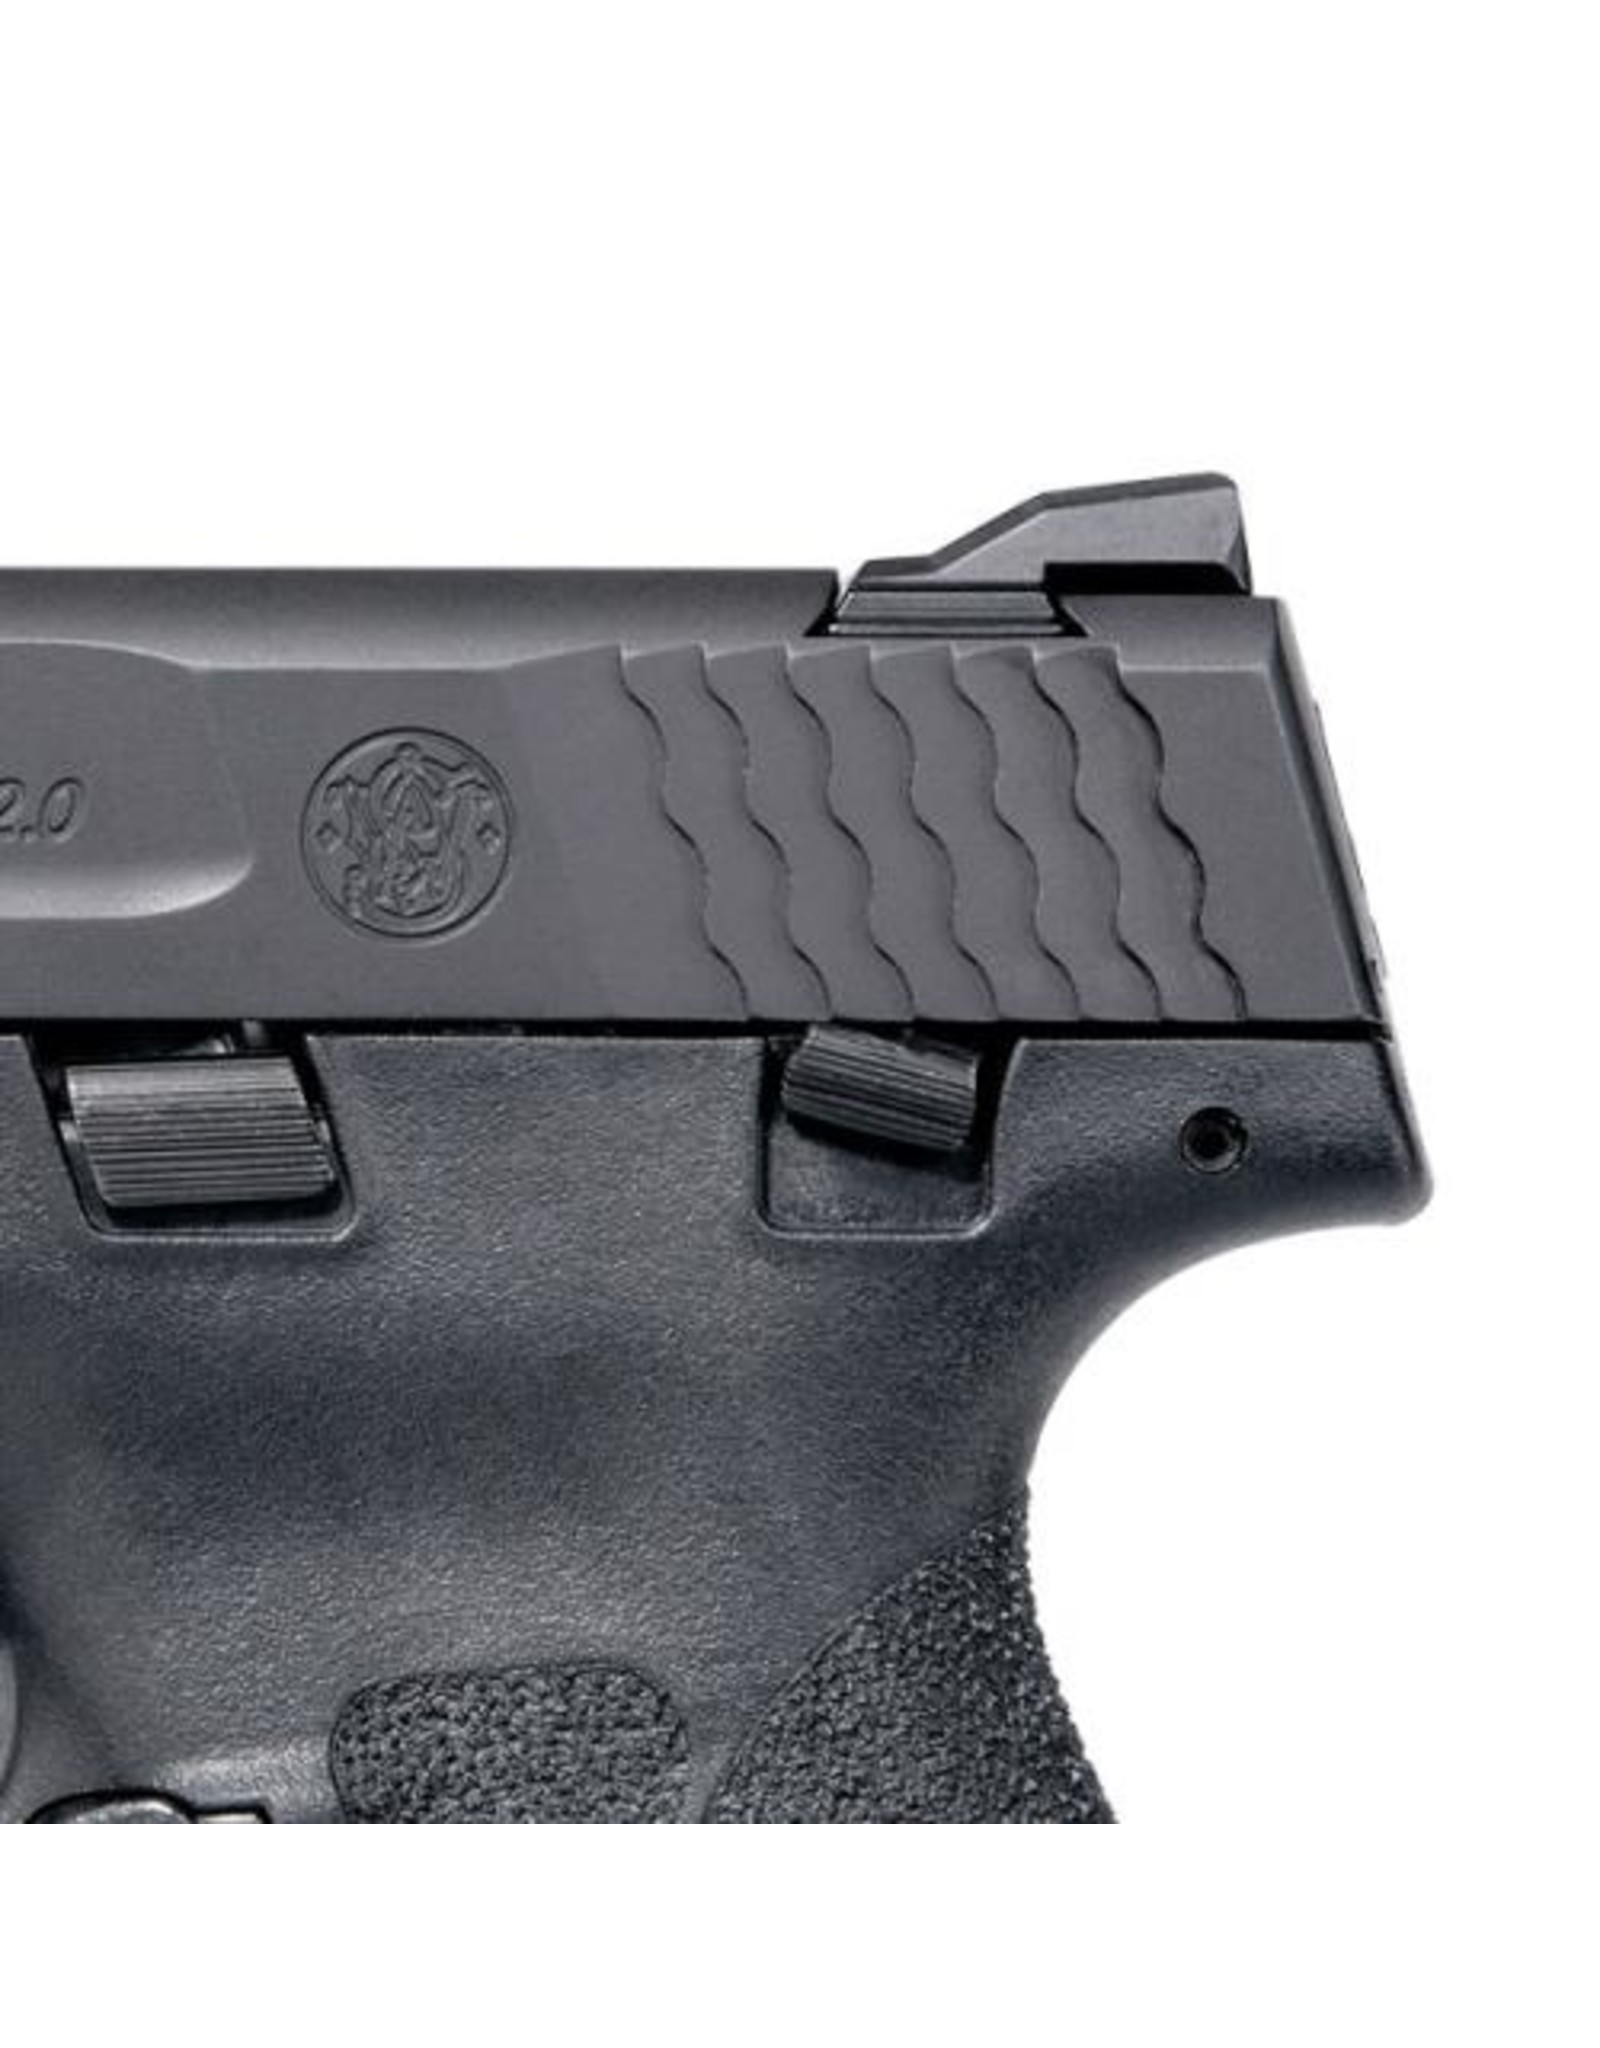 SMITH & WESSON Smith & Wesson M&P 9 Shield M2.0 9mm